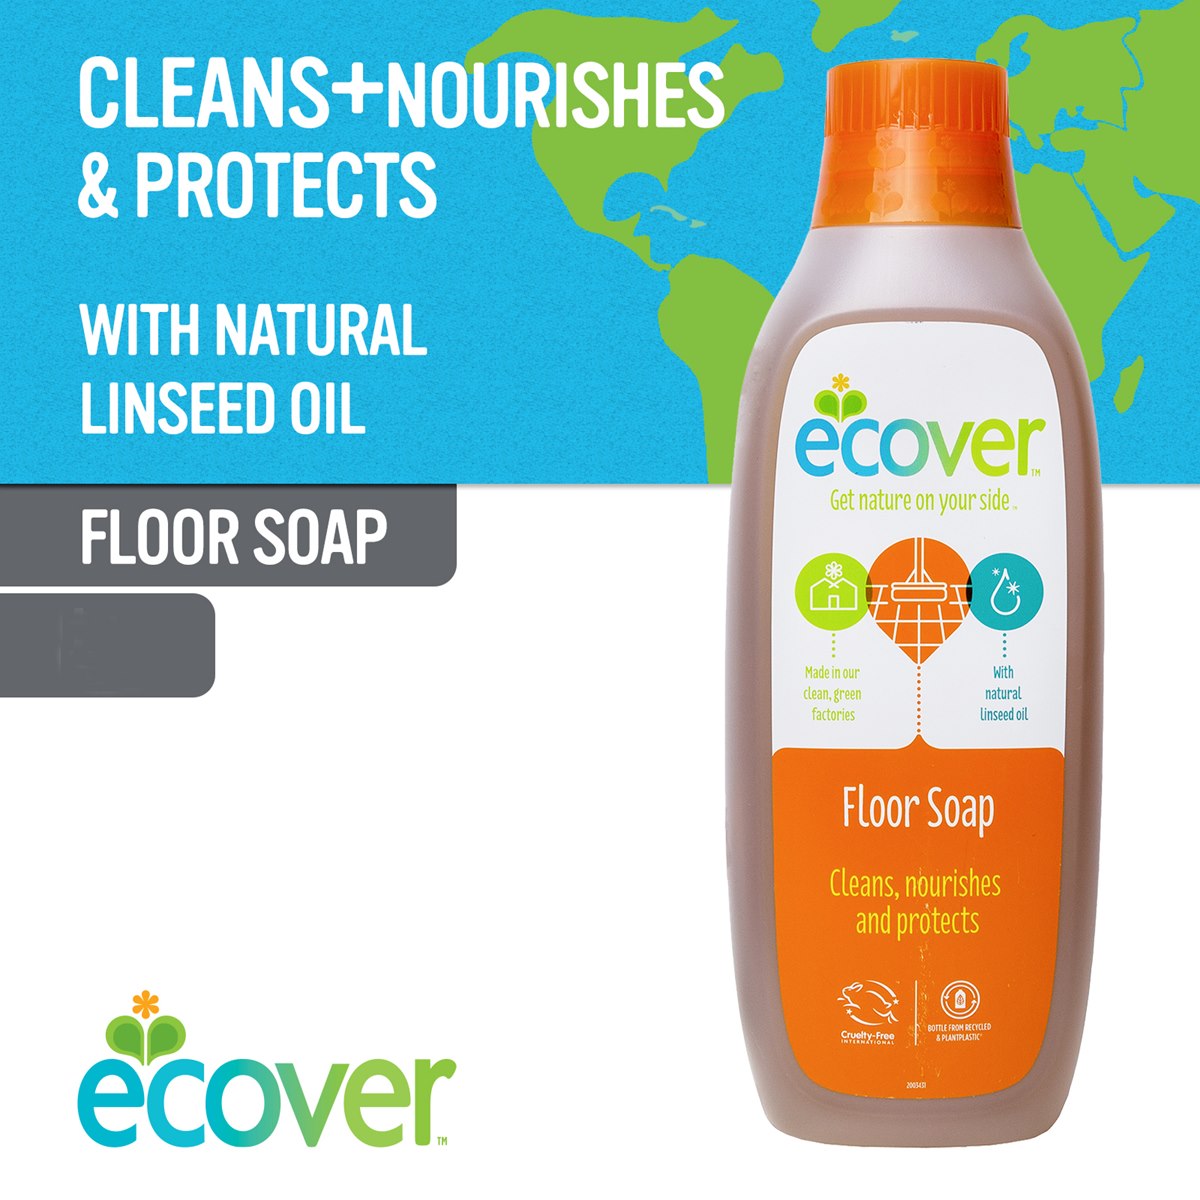 Where to Buy Ecover Floor Soap